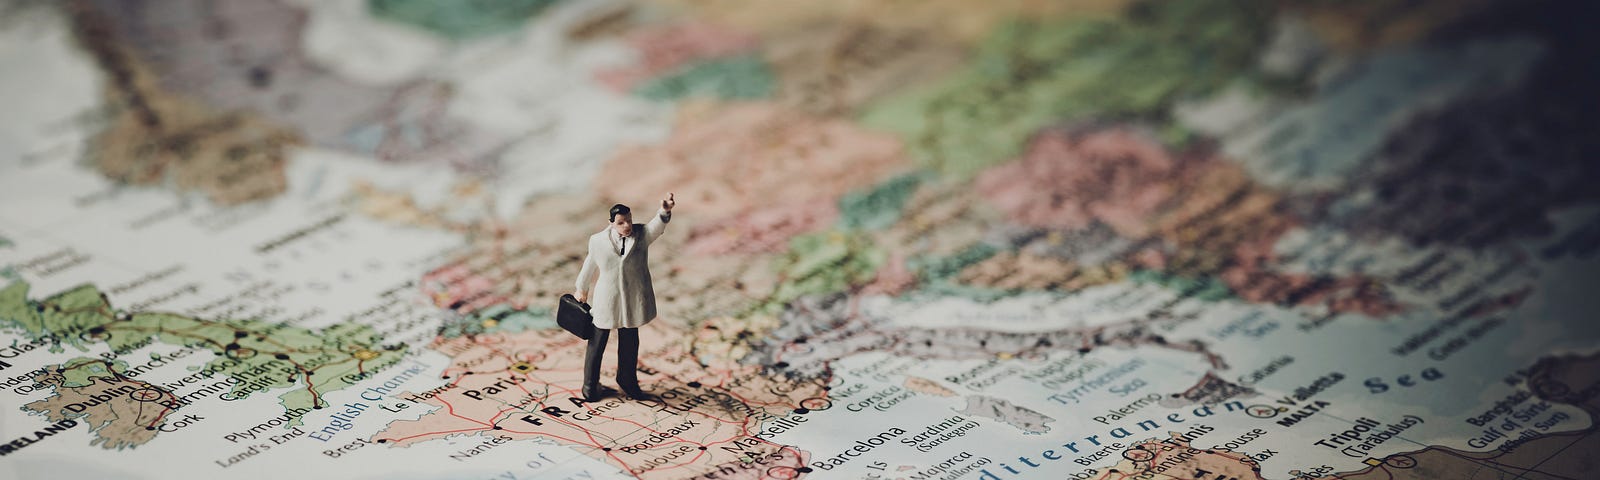 Image of figurine man placed on a map